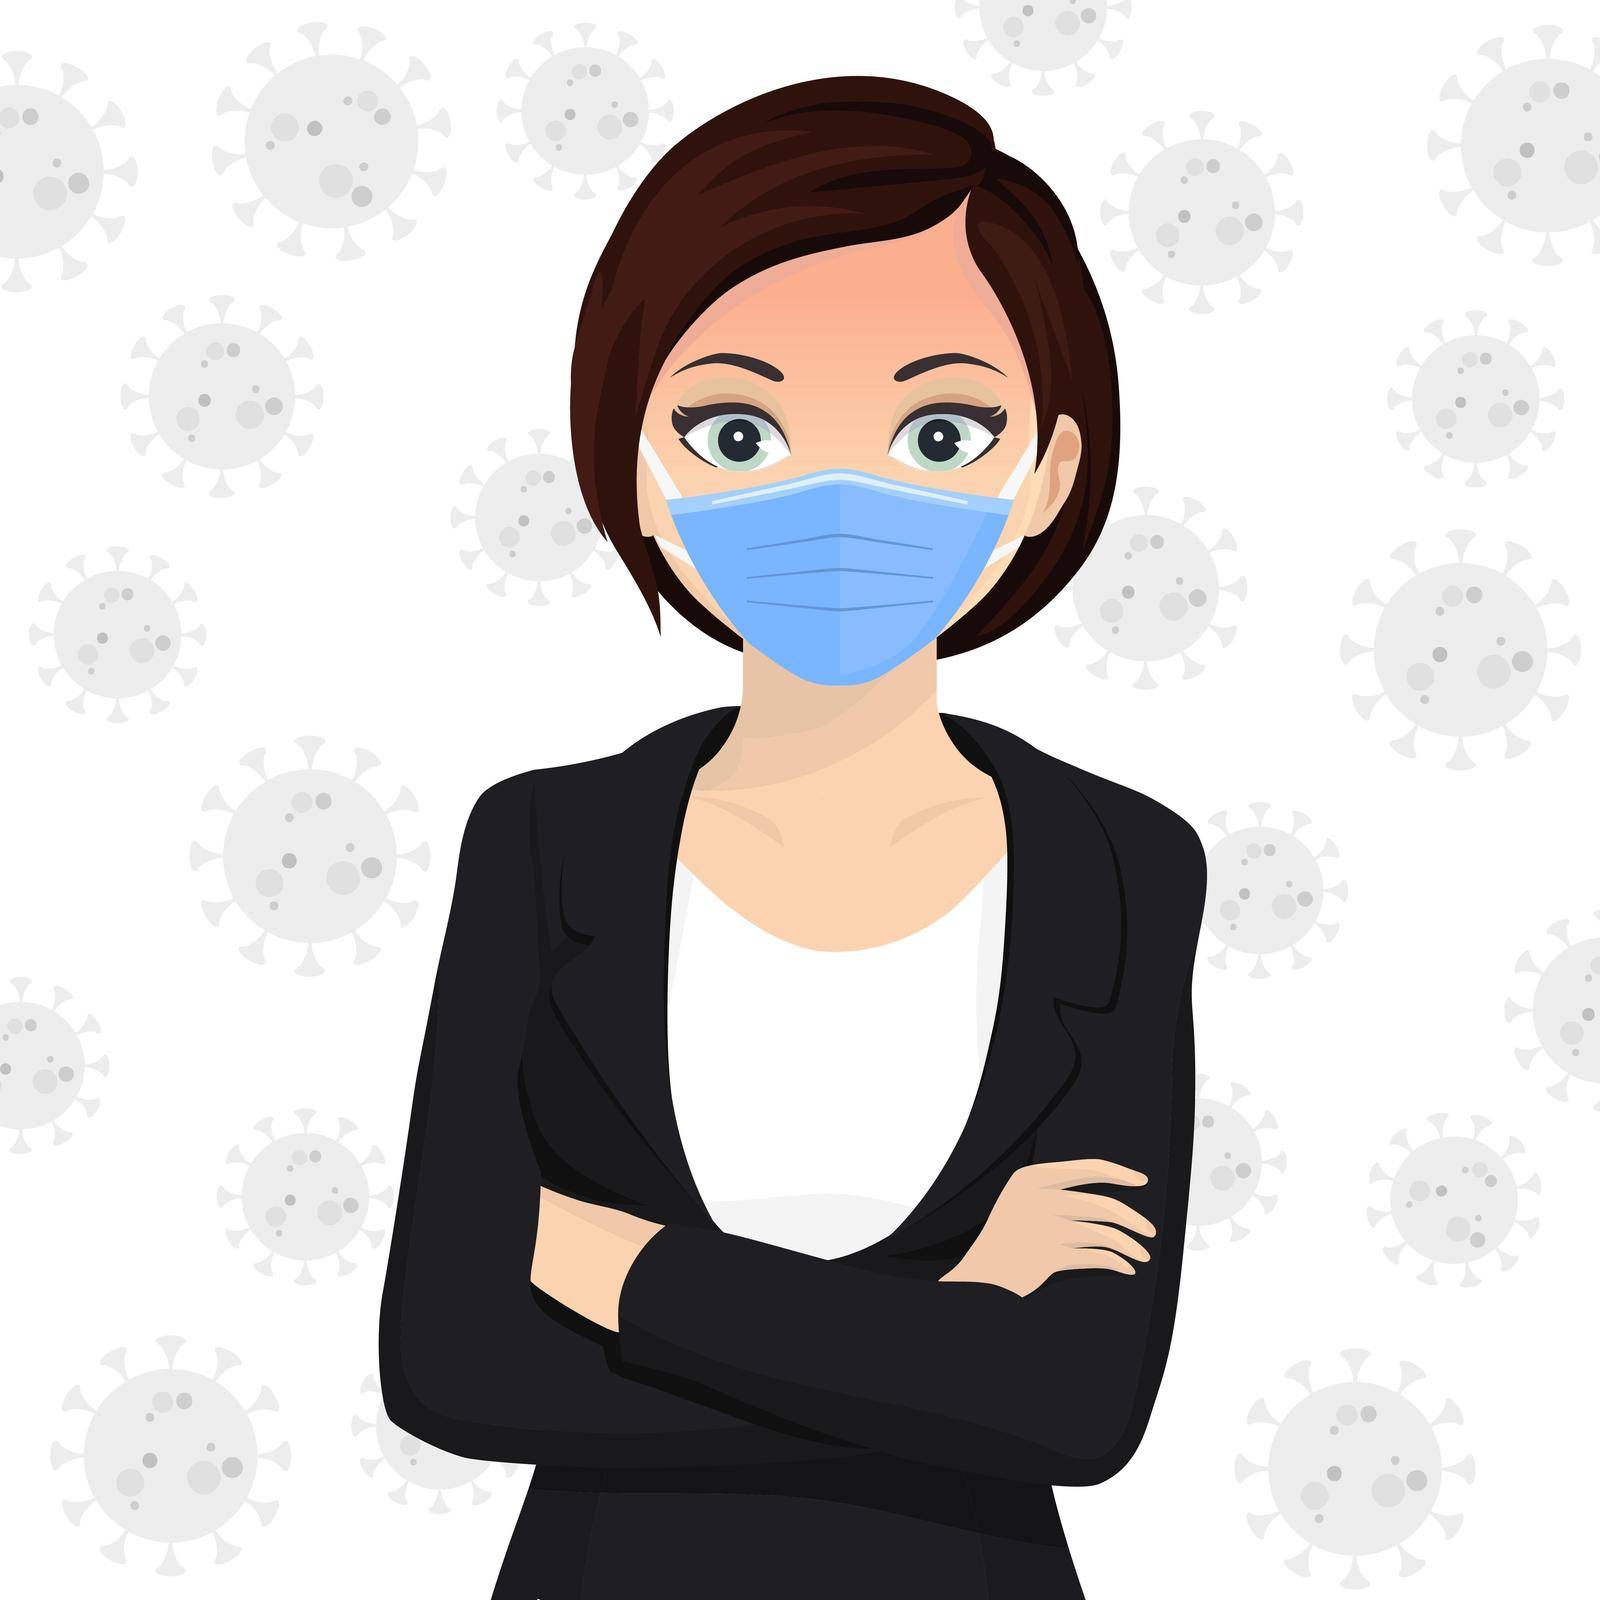 Woman use face mask. Disposable medical surgical blue protective mask among bacteria, flu, influenza, infectious disease. Girl cover mouth and nose from pathogen respiratory infection. Vector